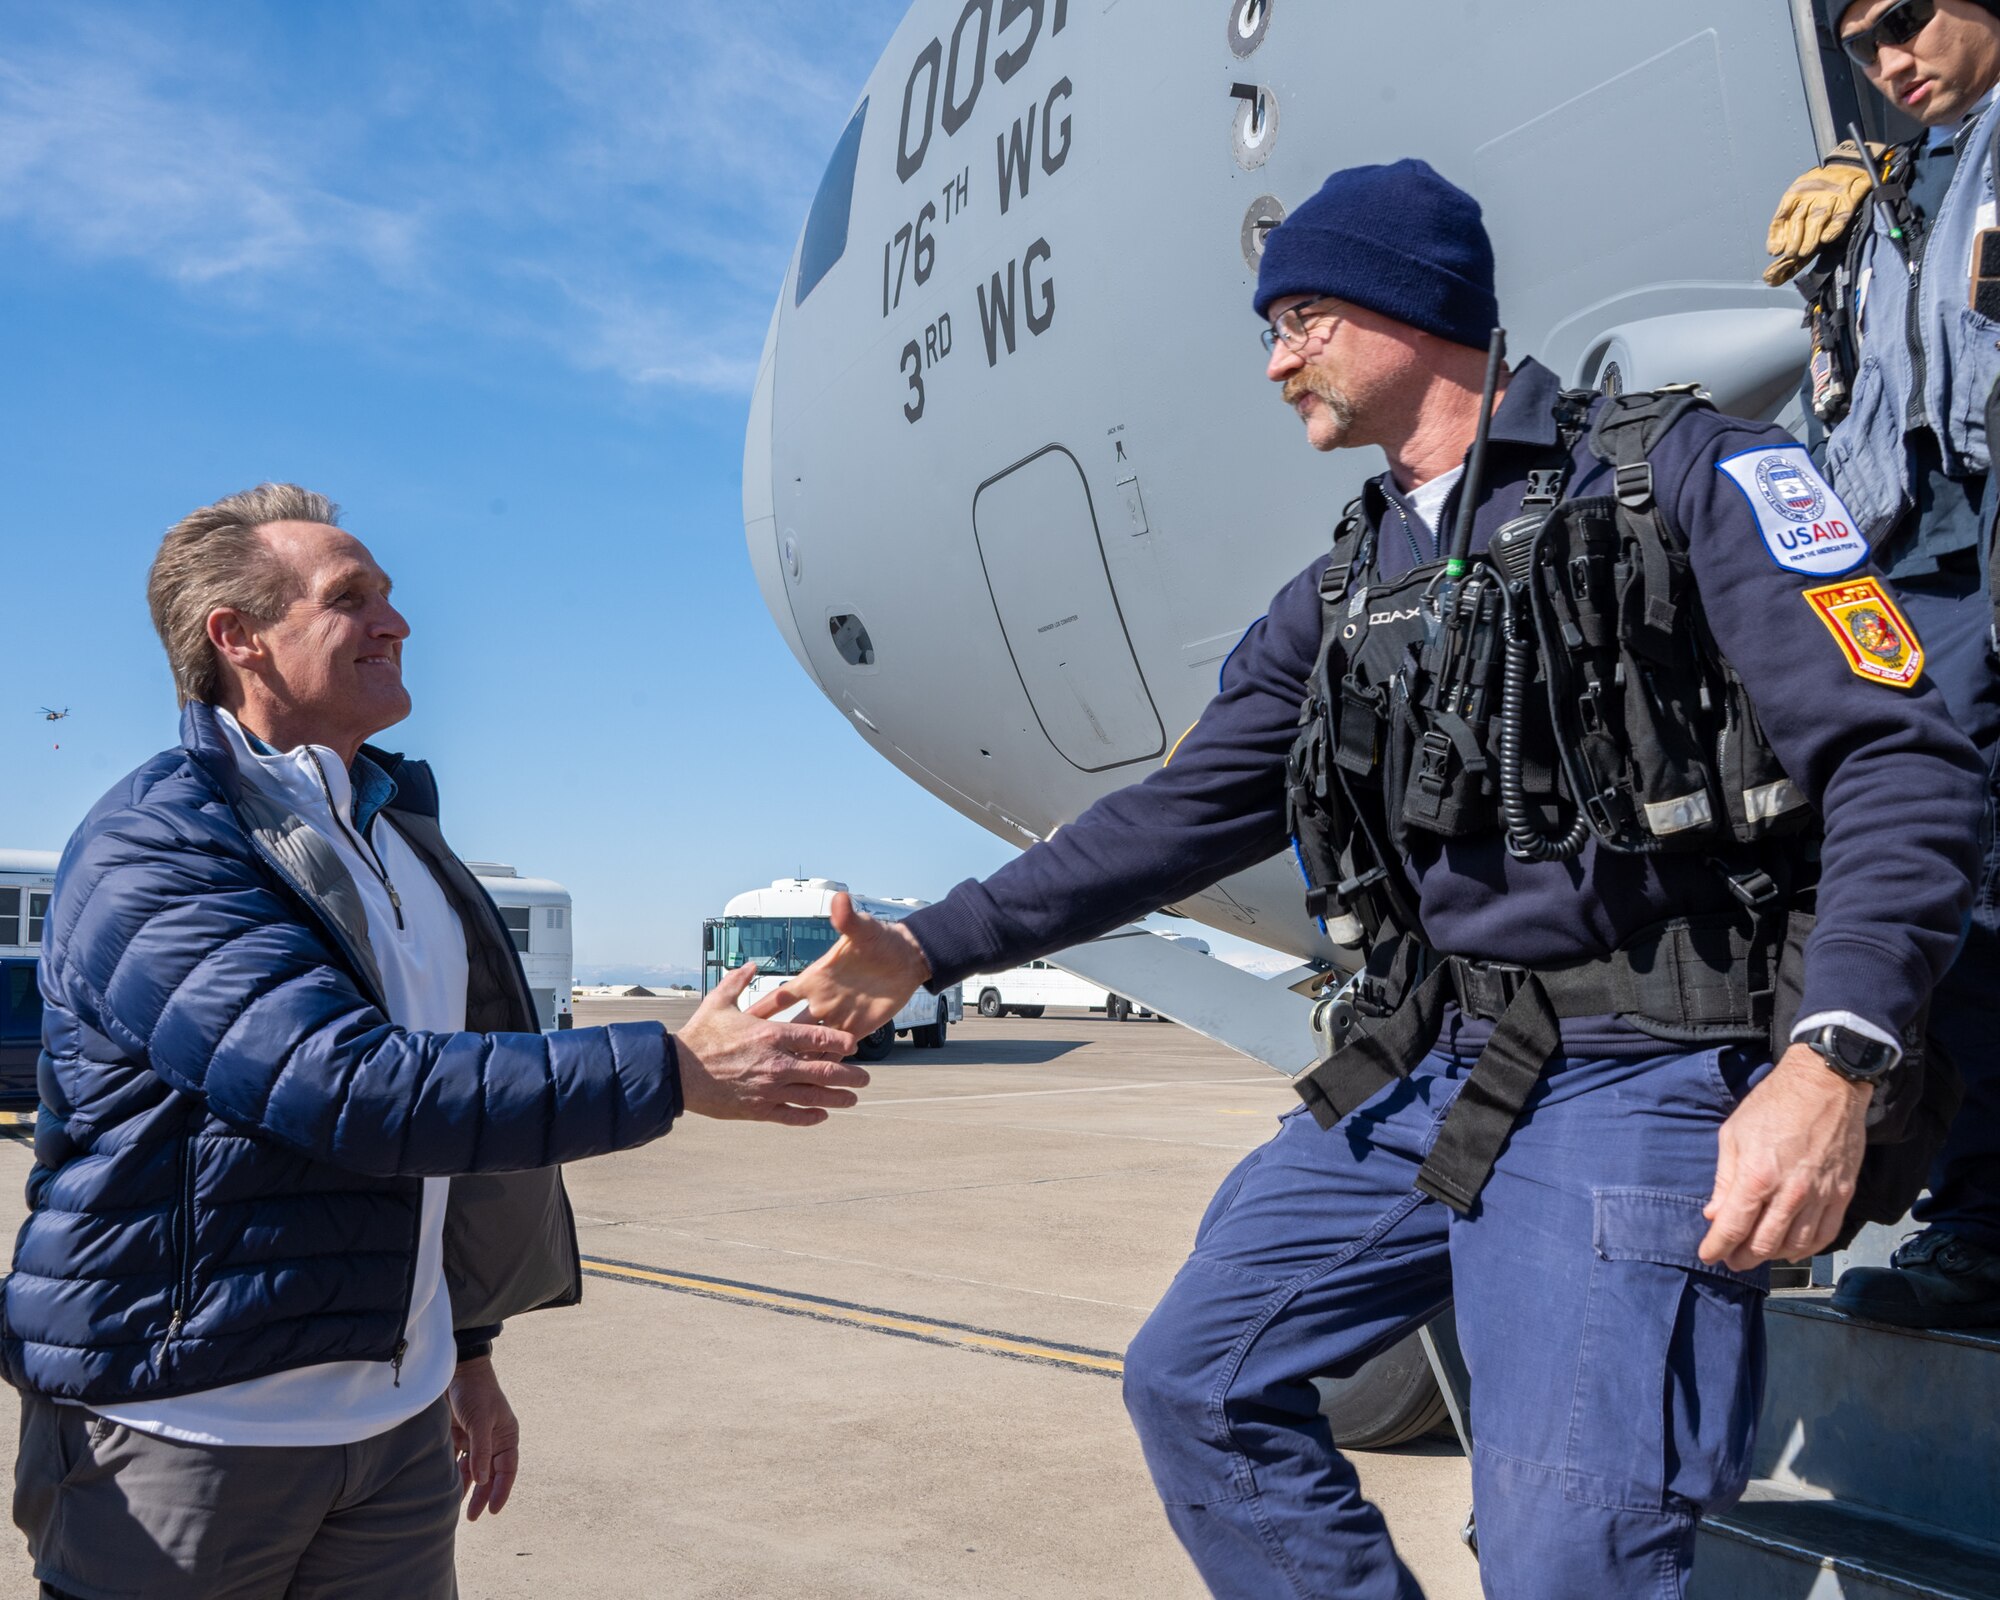 U.S. Ambassador Jeffry Flake, U.S. Ambassador to Türkiye, left, shakes hands with a member of the United States Agency for International Development’s Disaster Assistance Response Team, right, during their arrival at Incirlik Air Base, Türkiye, Feb 8, 2023. Ambassador Flake visited Incirlik AB to greet members of the USAID team, following a series of earthquakes that struck central-southern Türkiye on Feb 6, 2023. As Ambassador to Türkiye, Flake holds the highest civilian position as The Chief of Mission, and impacts the communication and resources of U.S. personnel, advancing the U.S. foreign policy goals. As a fellow NATO ally, the U.S. Government mobilized personnel to assist in Türkiye in their response efforts. (U.S. Air Force photo by Senior Airman David D. McLoney)